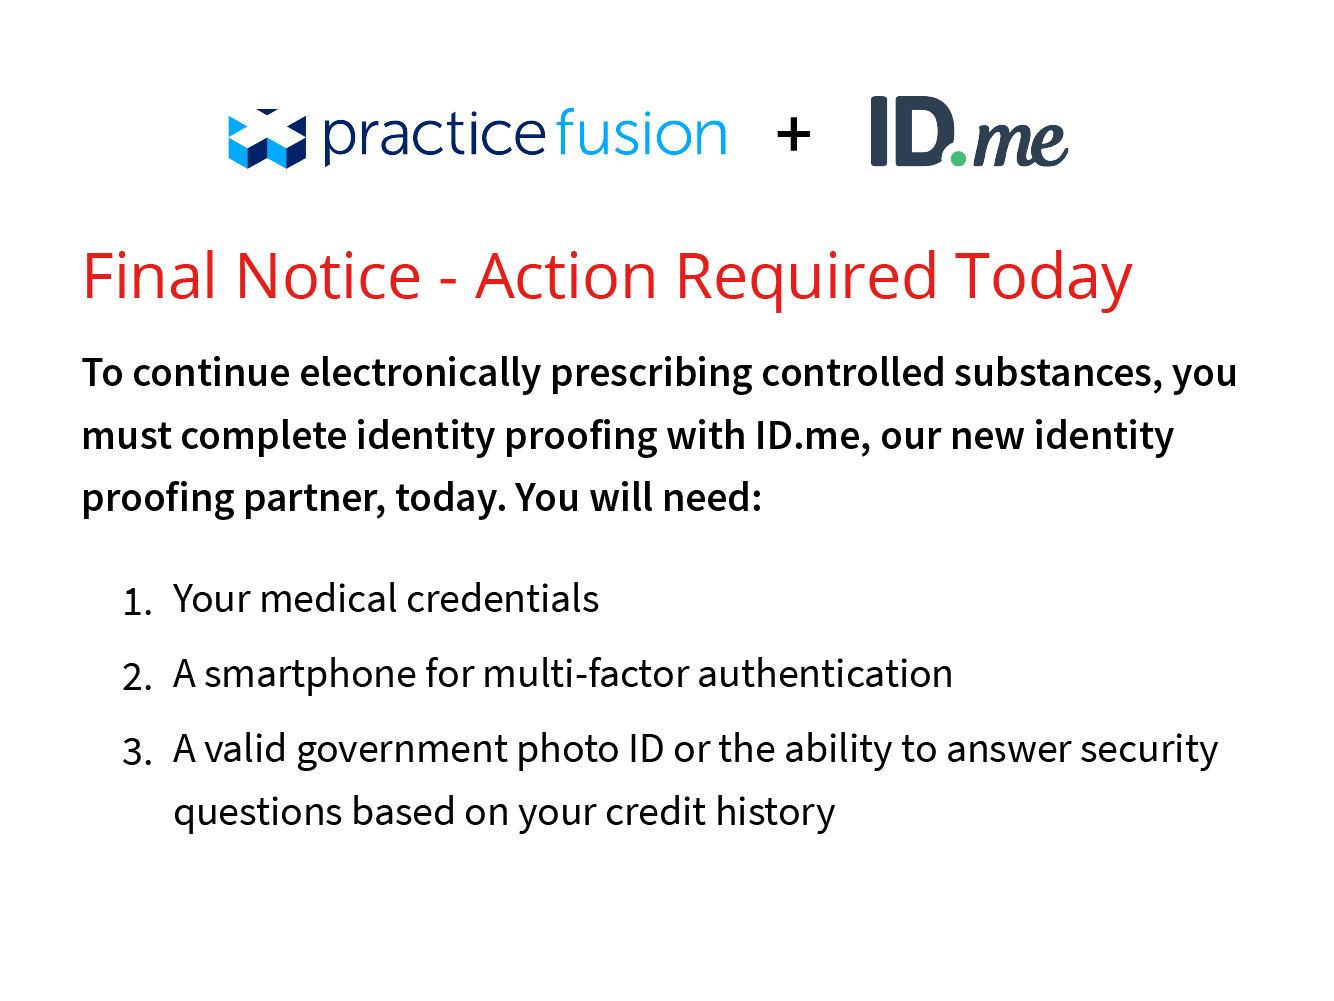 Final Notice - Action Required Today. To continue electronically prescribing controlled substances, ou much complete idetity proofing with ID.me, our new identity proofing partner, today.  You will need: 1 - Your medical credentials. 2 - a smartphone for multi-factor authentication. 3 - A valid government phot ID of the ability to answer security questions based on your credit history.